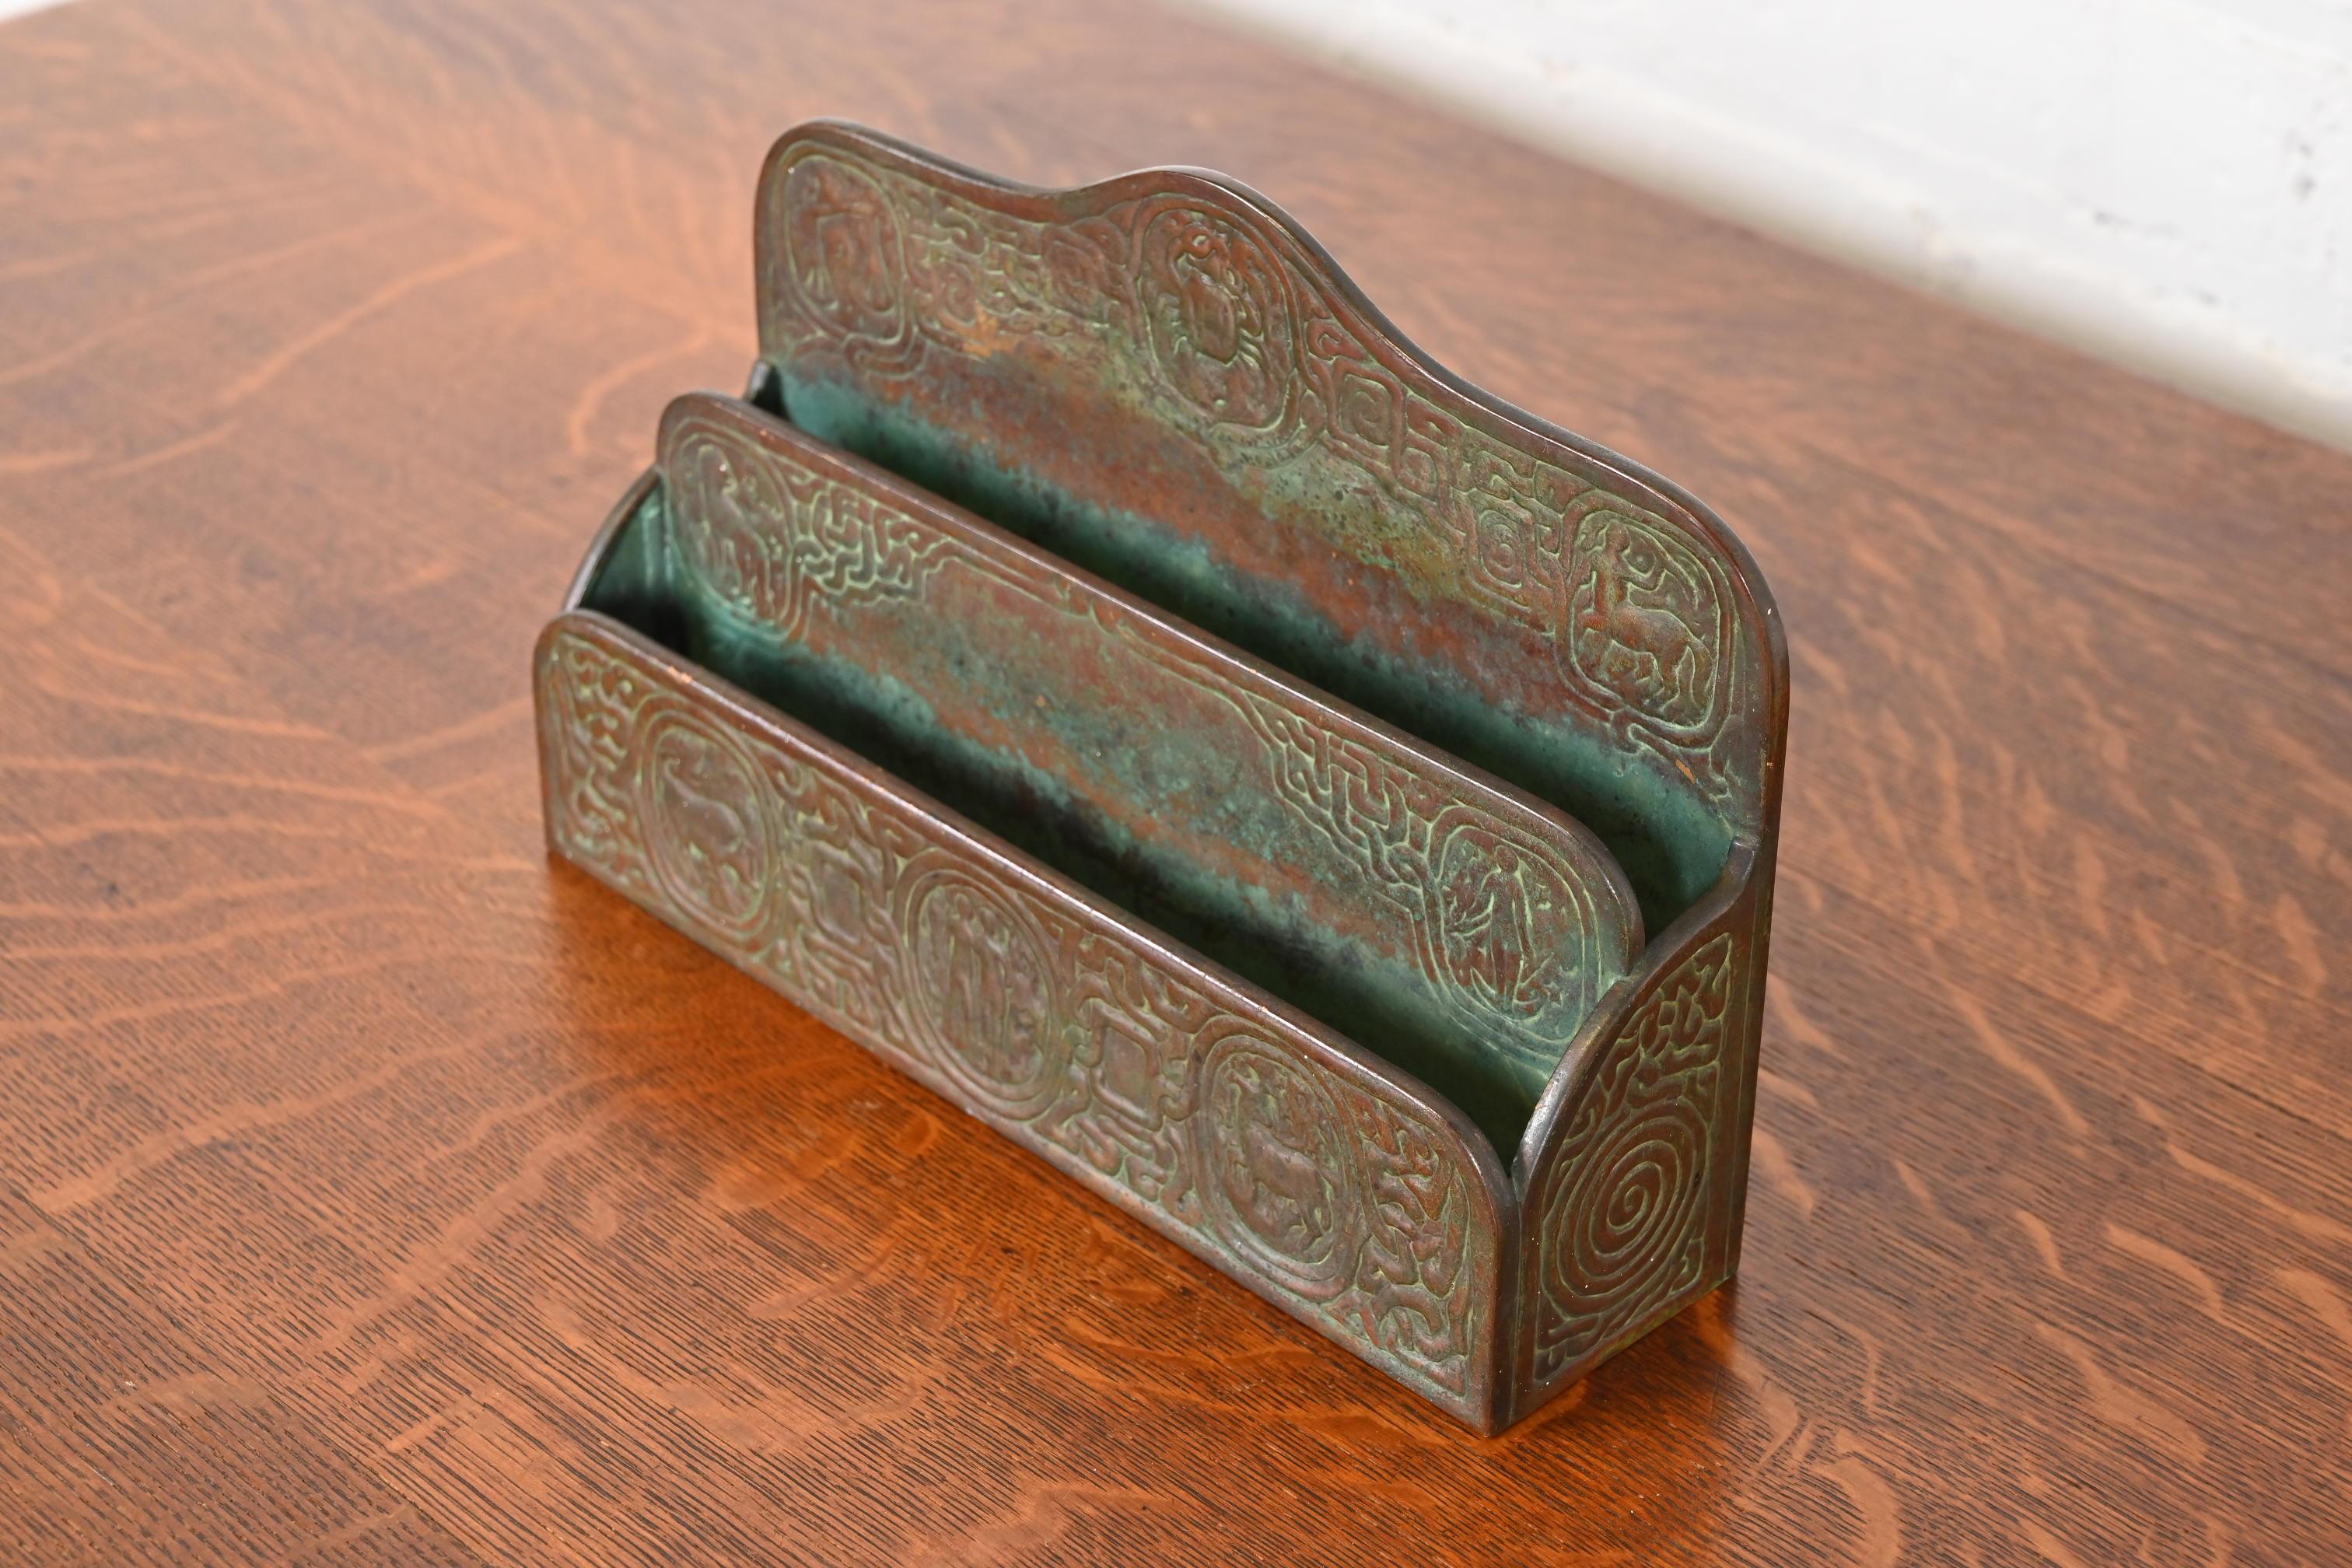 Tiffany Studios New York Zodiac Patinated Bronze Letter Rack, Circa 1910 In Good Condition For Sale In South Bend, IN